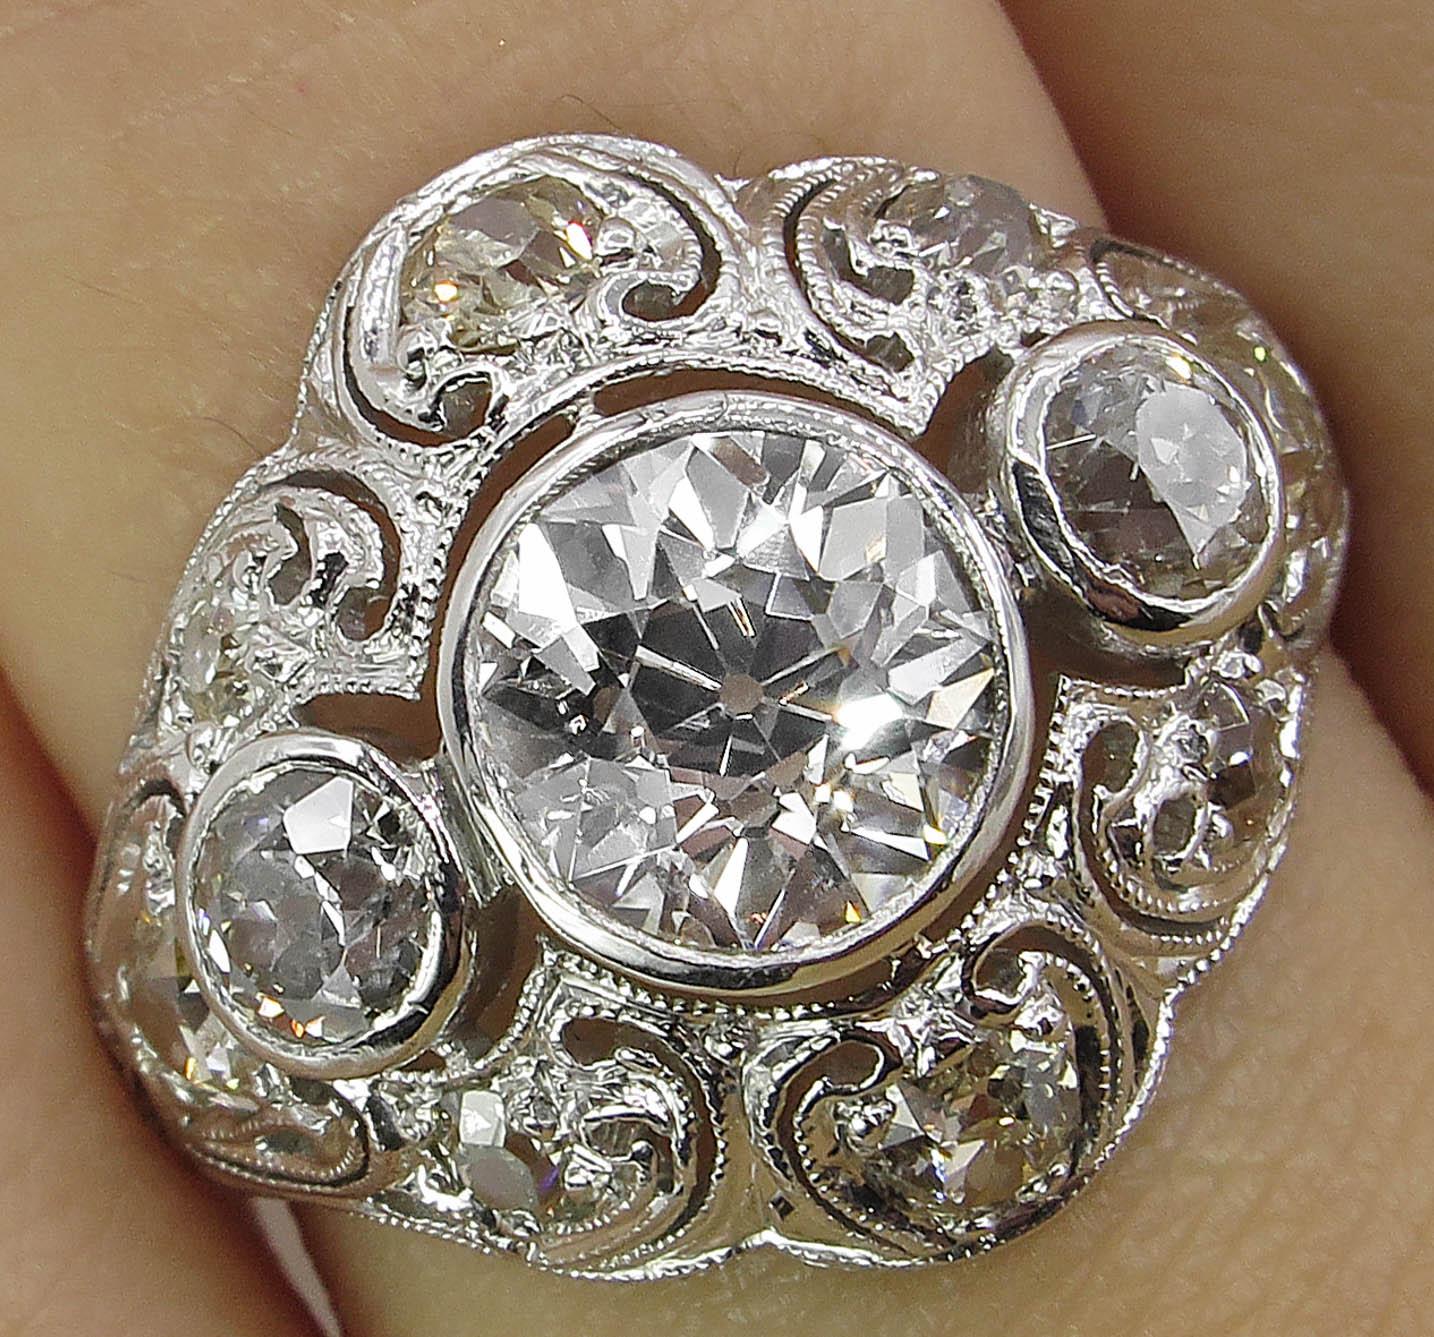 A Beautiful Antique Vintage Authentic Late Edwardian/ Early Art Deco Platinum (tested) dazzles Bezel set GIA Certified 1.19ct Old European Center diamond in J color and VS2 clarity (Near COLORLESS and VERY clear). The measurements of the Center are